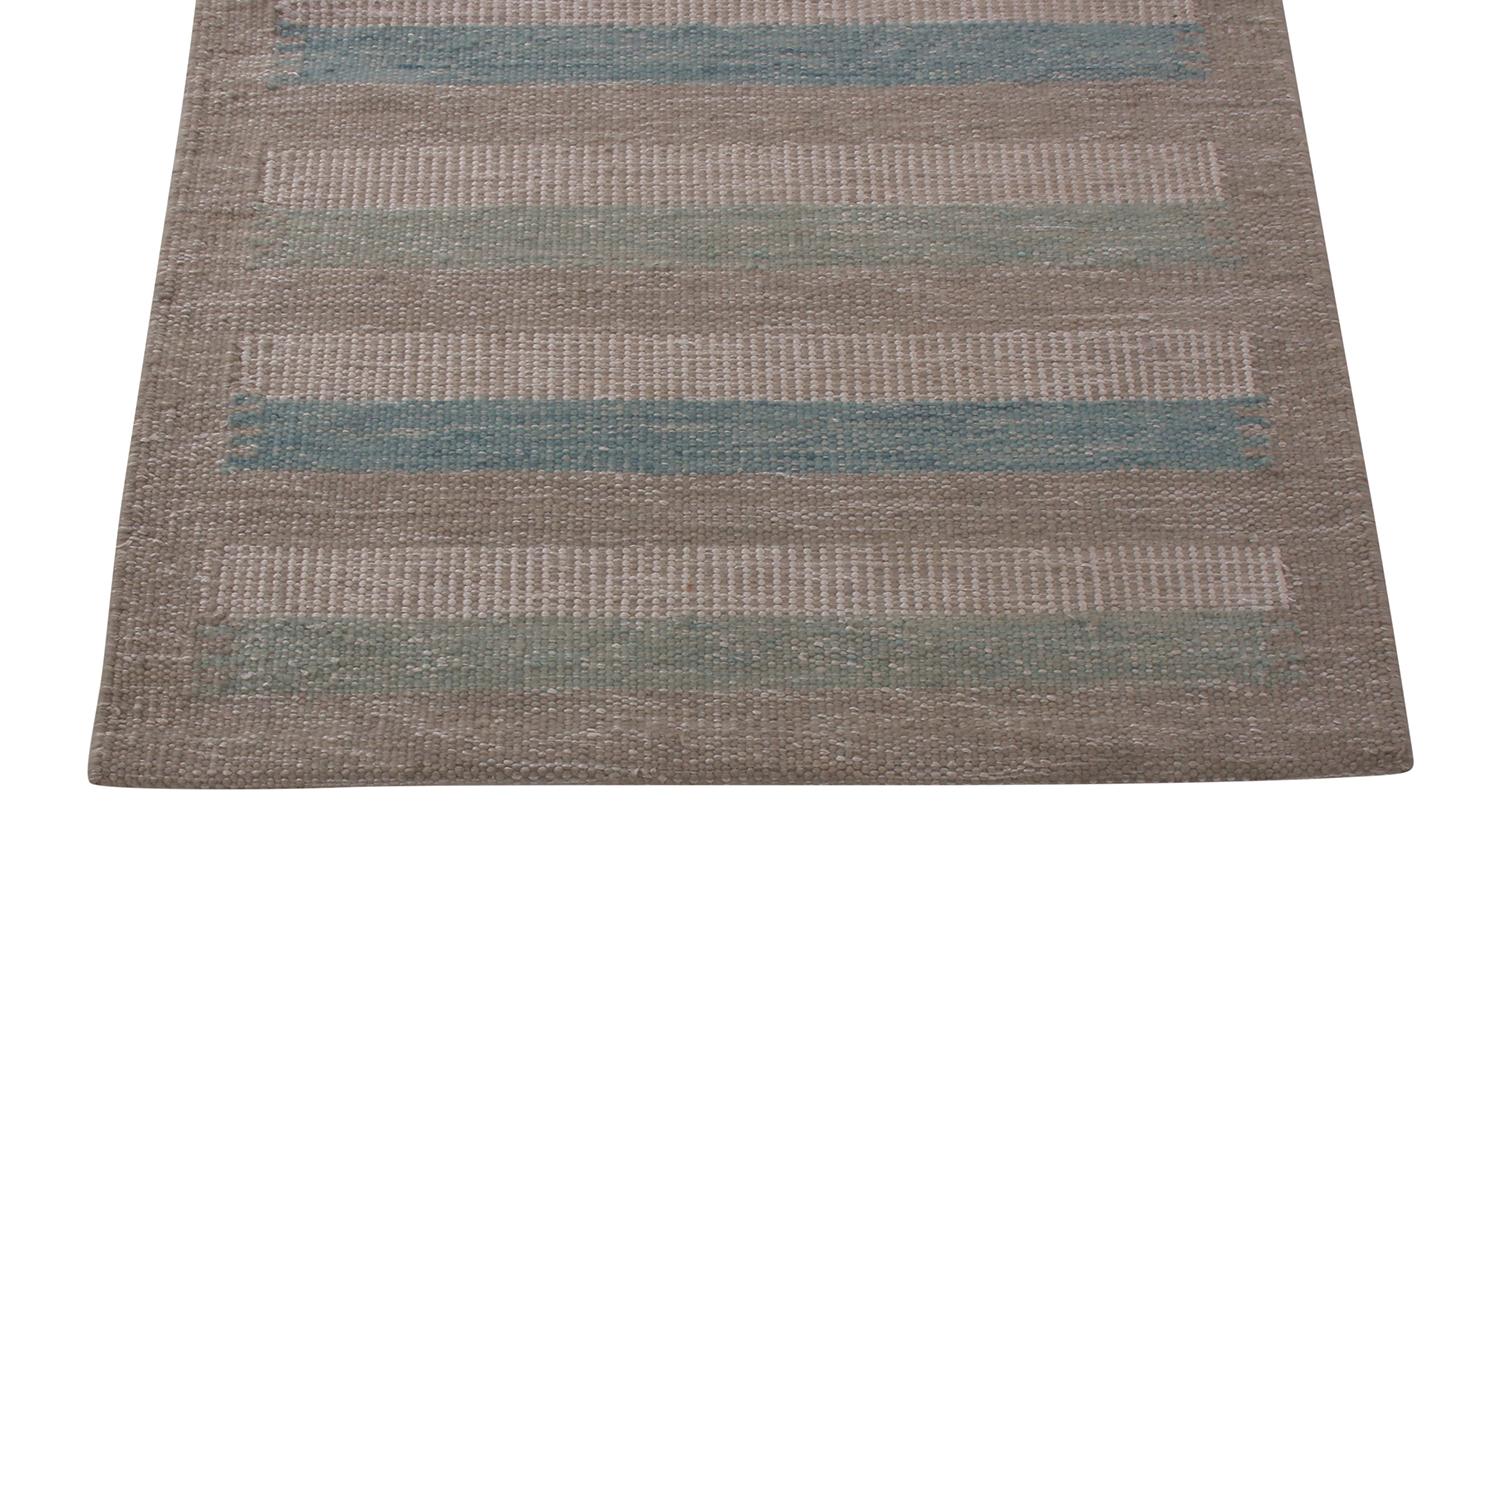 handwoven in distinguished natural wool with a unique blend of natural undyed yarns, this modern rug hails from the latest flat-weave additions to Rug & Kilim’s Scandinavian Kilim Collection, a celebration of Swedish modernism with new large-scale